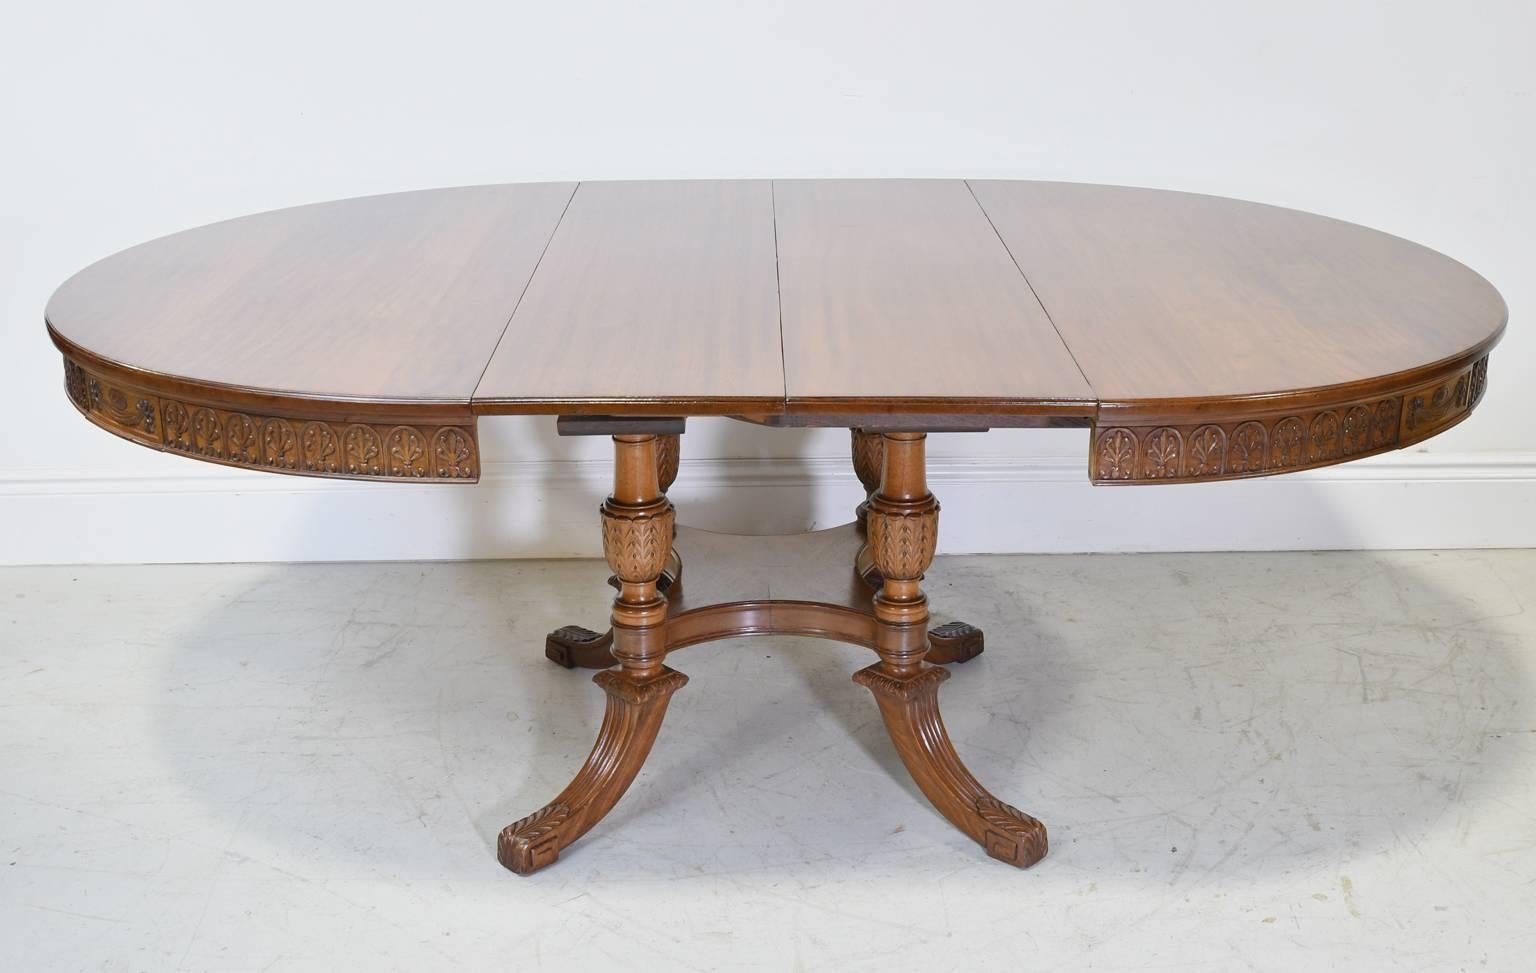 52 inch round pedestal dining table